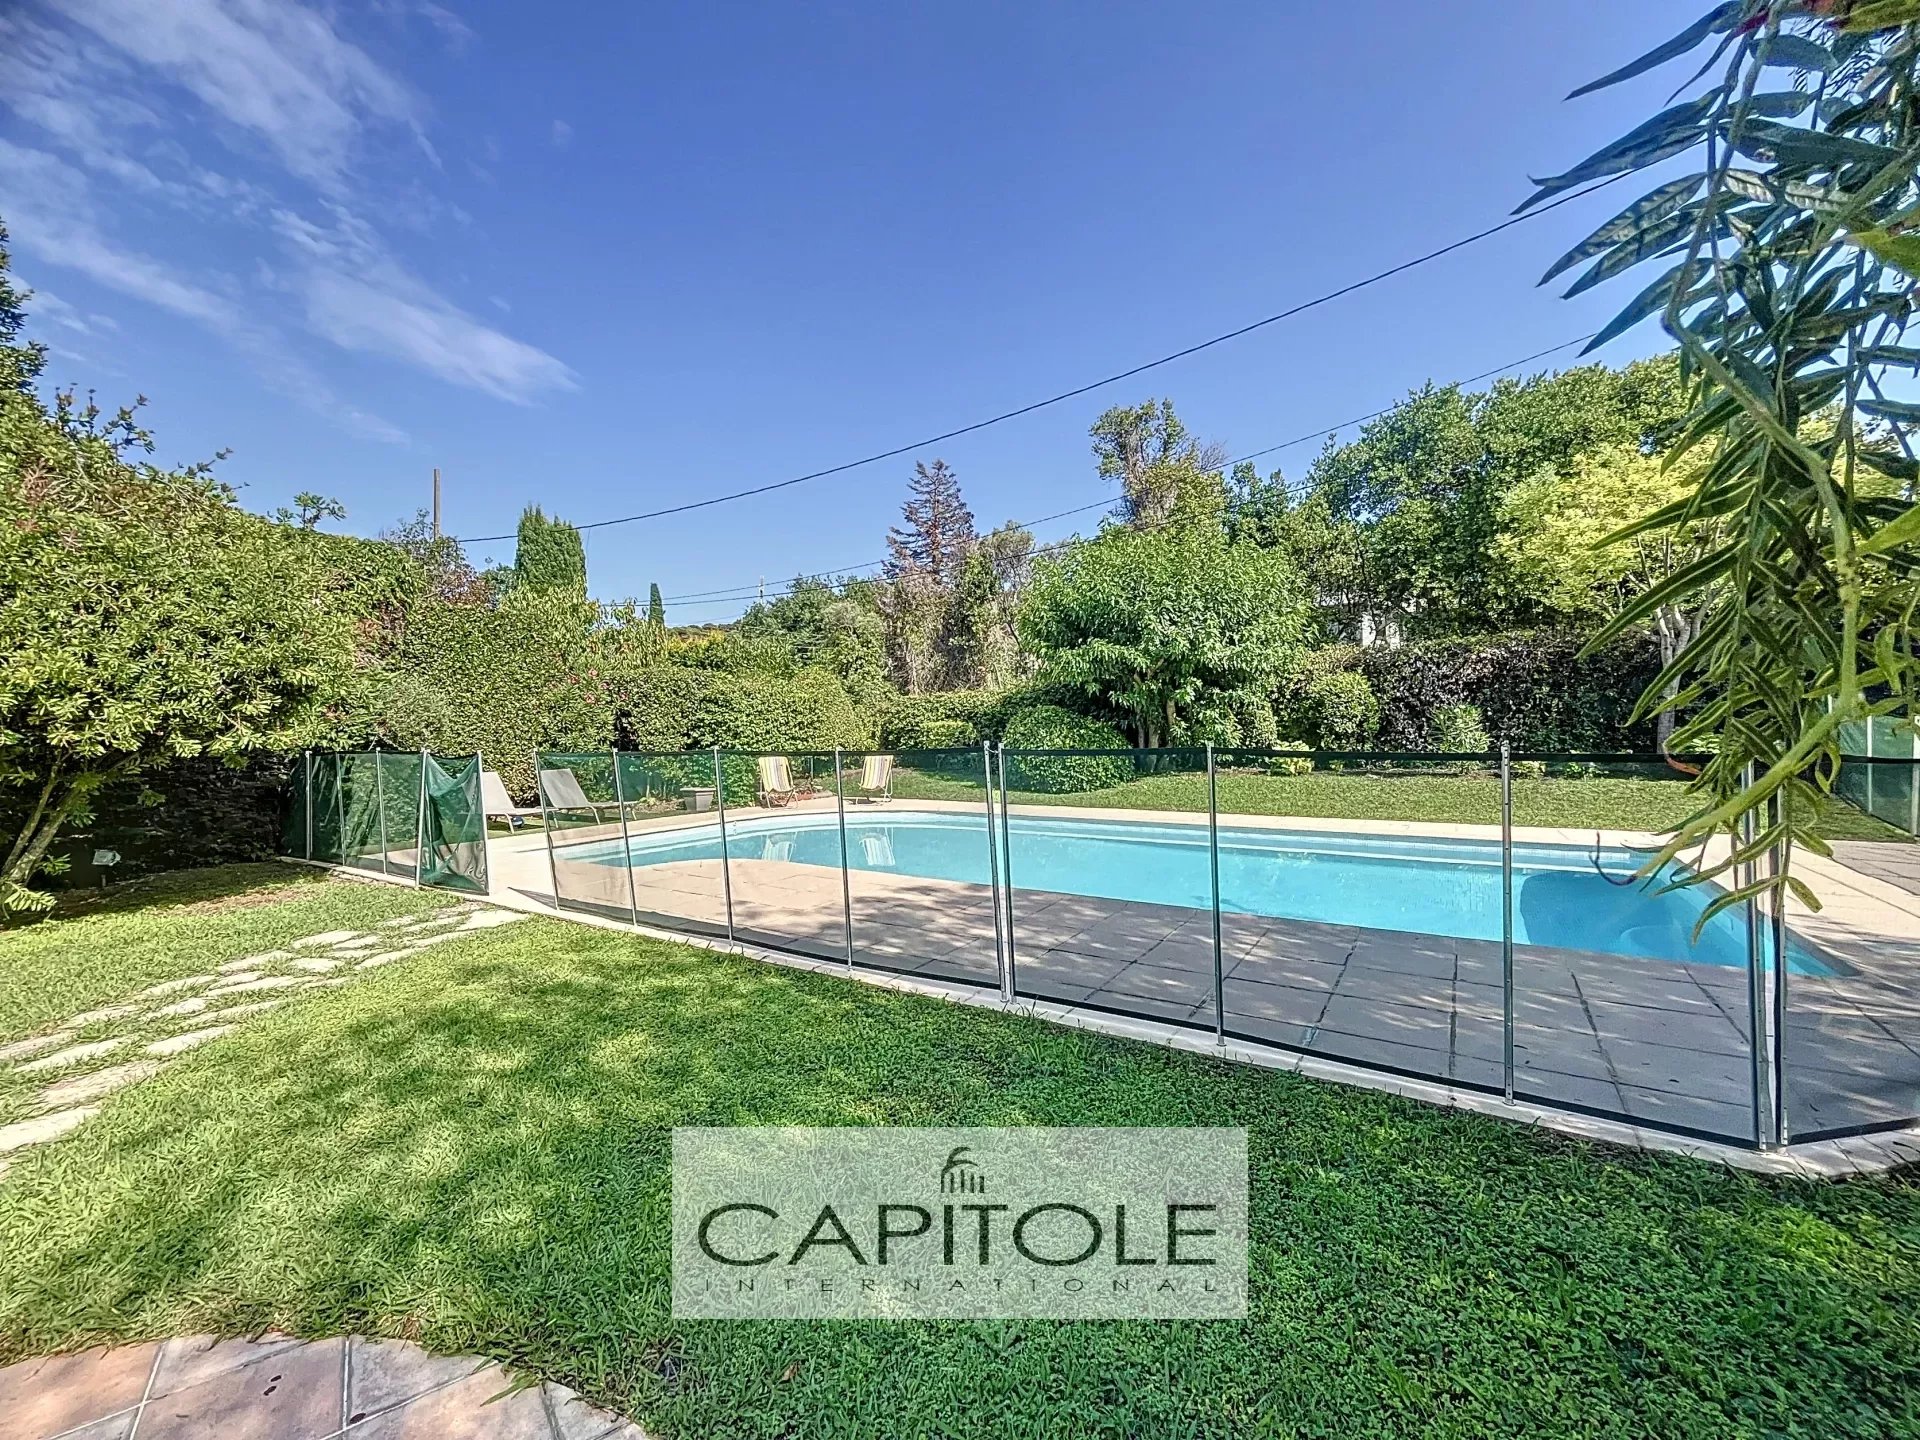 FOR SALE – 5 BEDROOMS VILLA ON ONE LEVEL WITH SWIMMING POOL - CAP D'ANTIBES